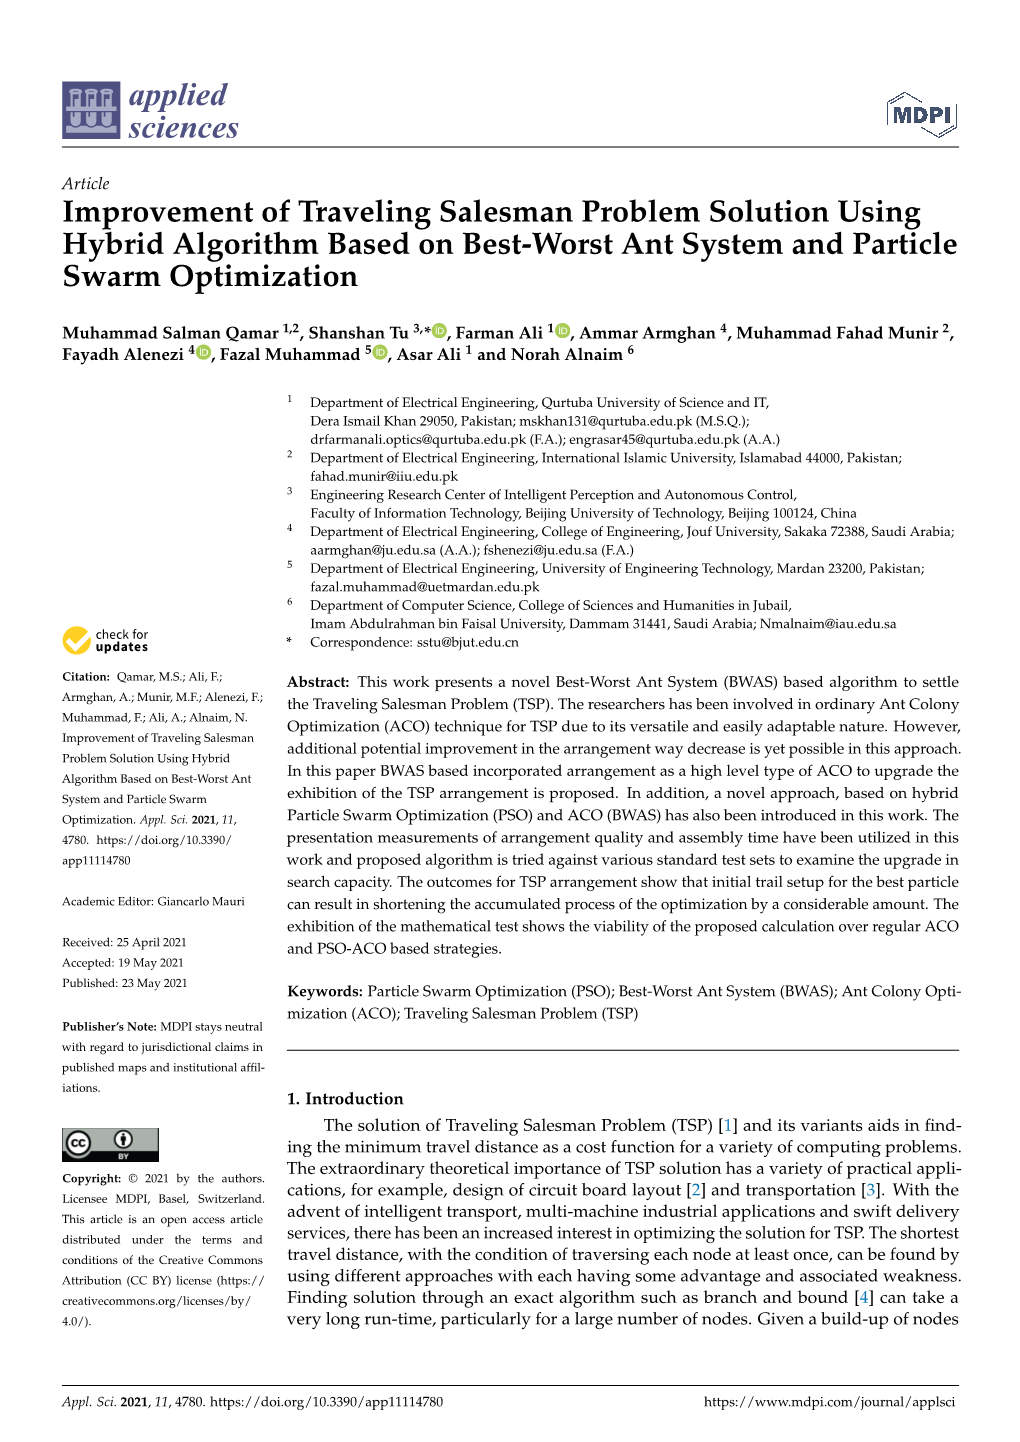 Improvement of Traveling Salesman Problem Solution Using Hybrid Algorithm Based on Best-Worst Ant System and Particle Swarm Optimization